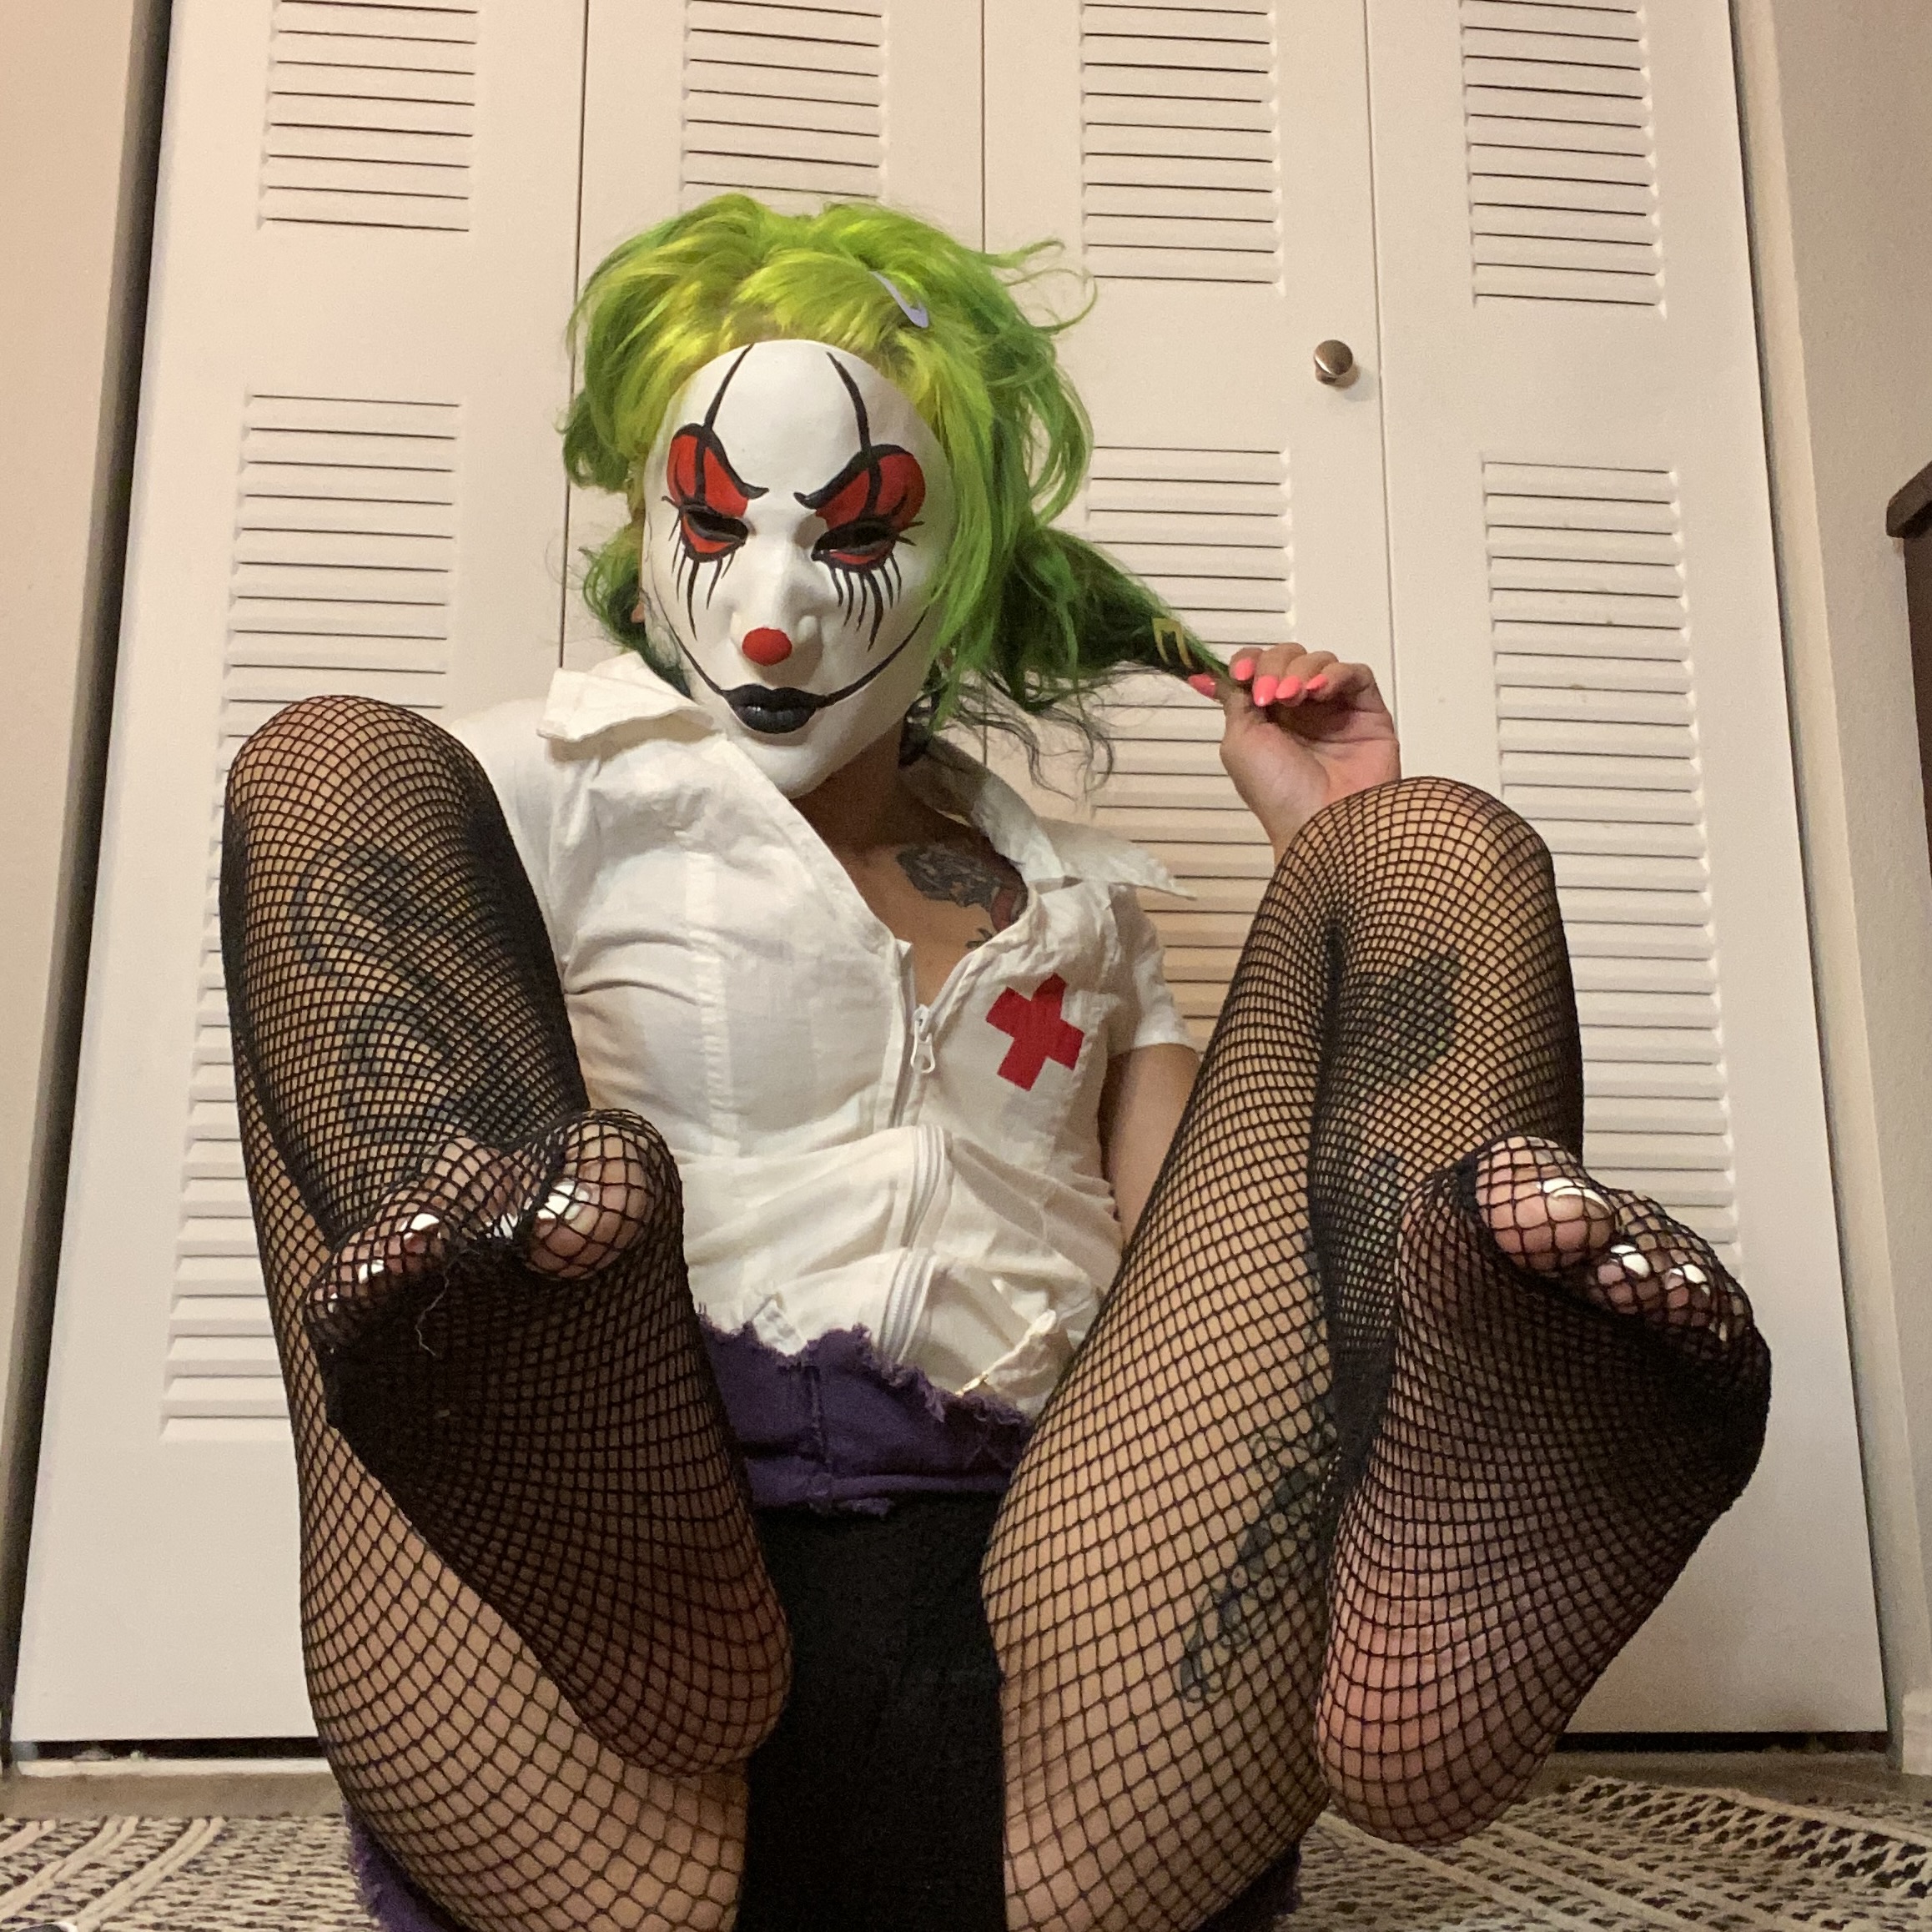 Latex Fetish Porn Clown - Clown Videos, Photos And Other Content and Other Amateur Porn Content on ELM